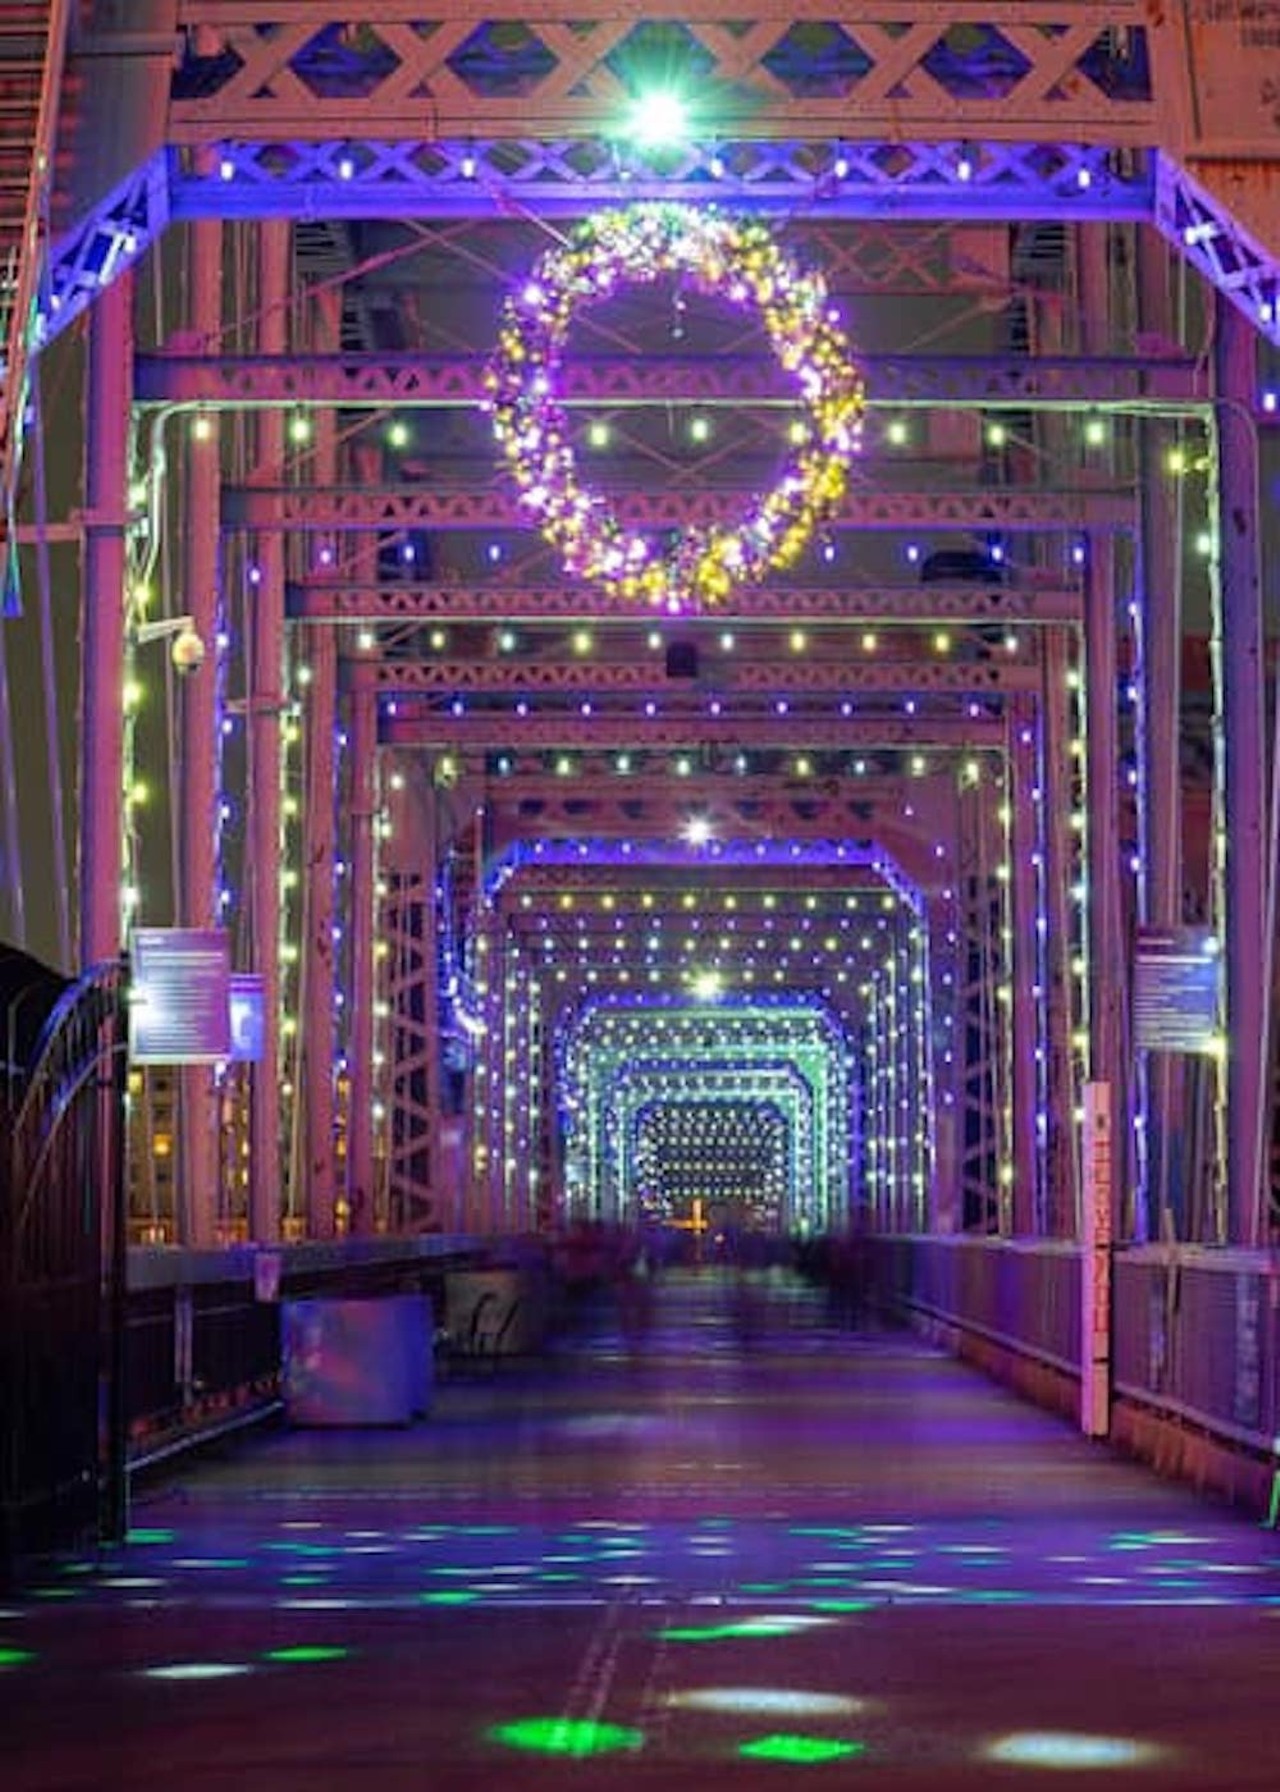 Winter Nights & River Lights at the Purple People Bridge
The Purple People Bridge will be adorned with thousands of lights, glowing yarn art and themed holiday projections this winter, all set to seasonal tunes. A 25-foot Christmas Wish Tree will help “provide gifts for individuals in need such as troubled teens, disabled individuals, and disadvantaged seniors,” per an event description. 
Through Jan. 8. Free admission. 1 Levee Way, Newport.